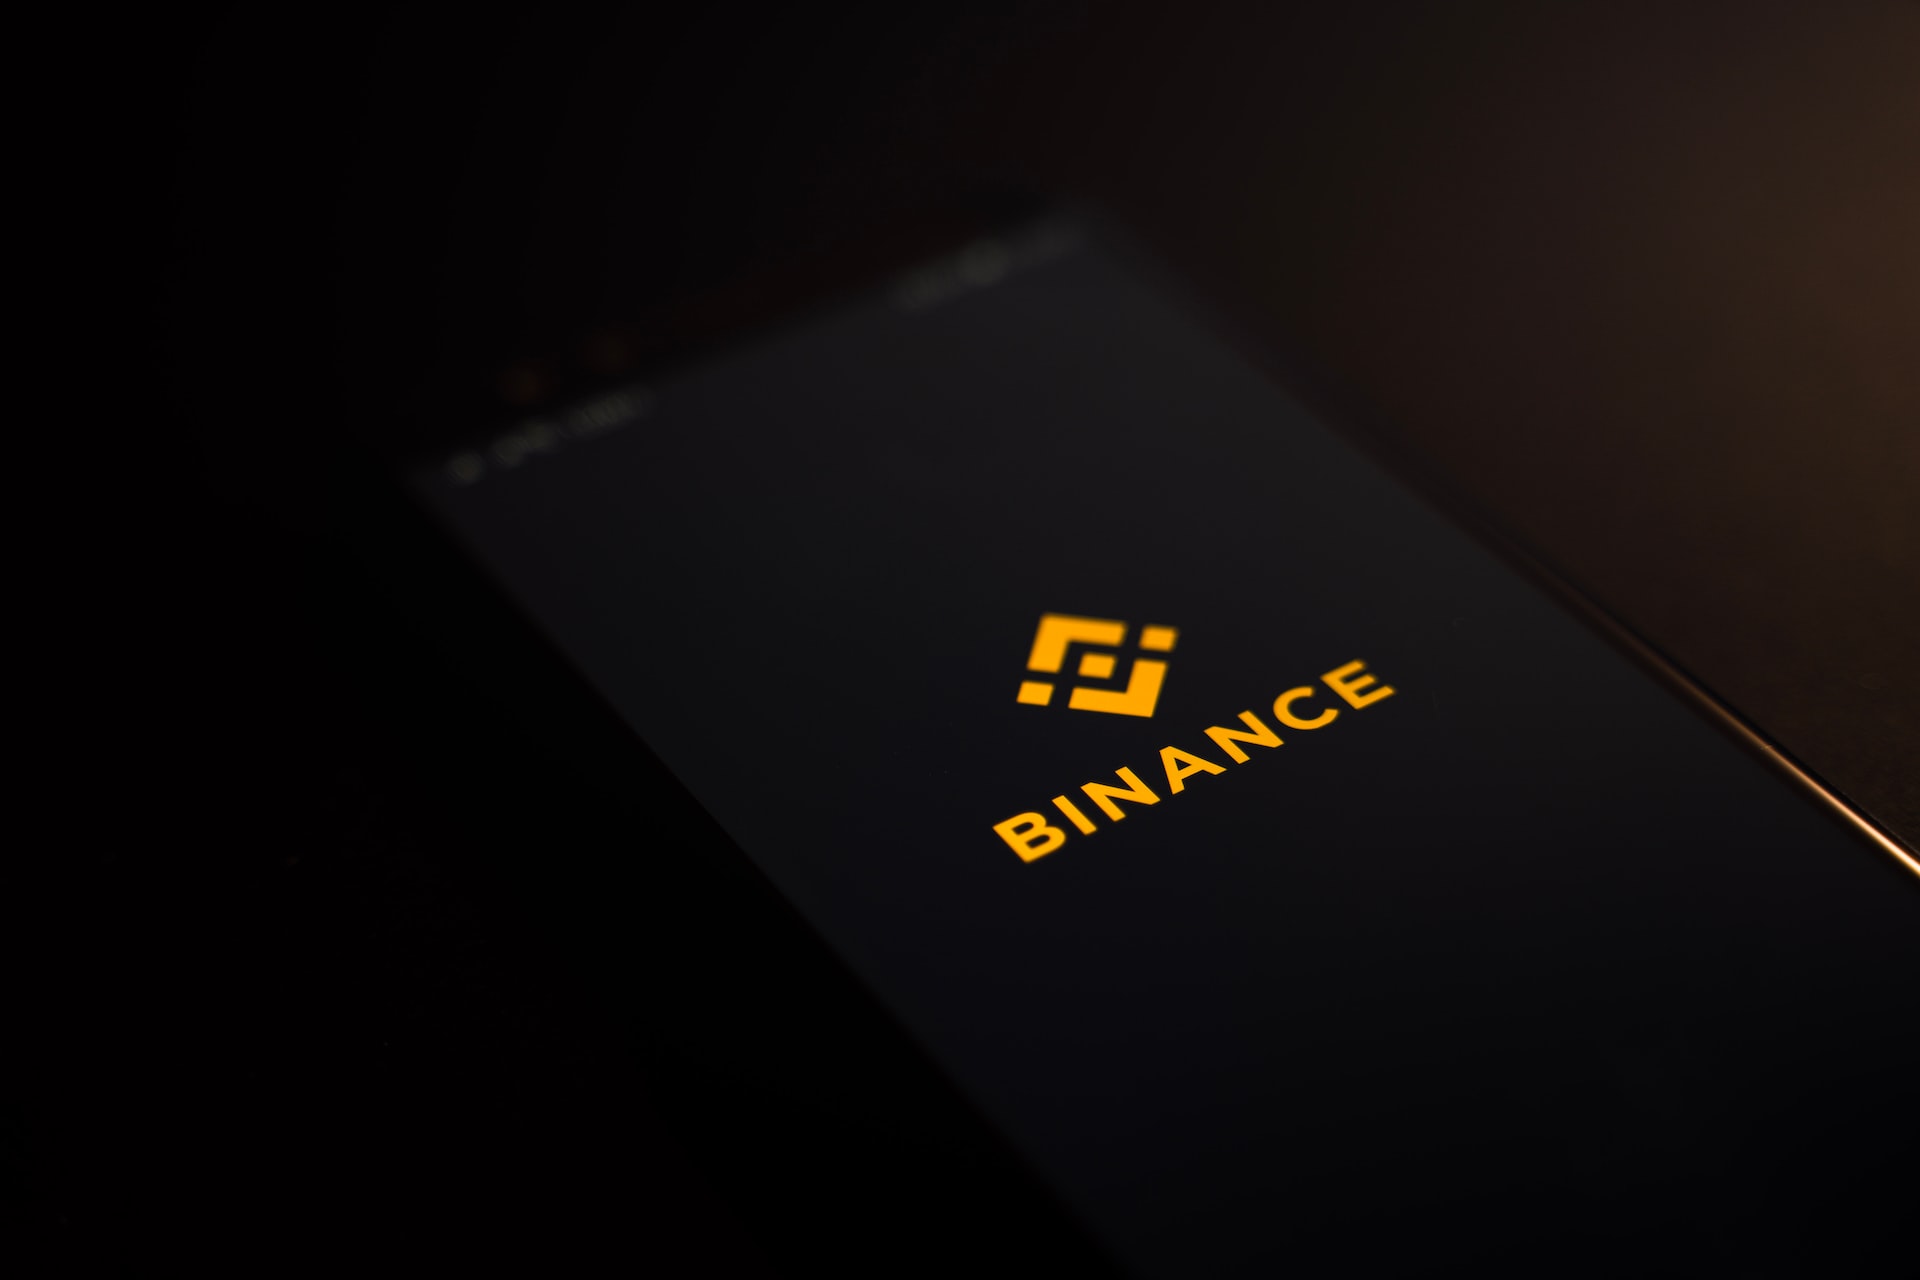 Binance reassures users by topping up SAFU to $1 billion